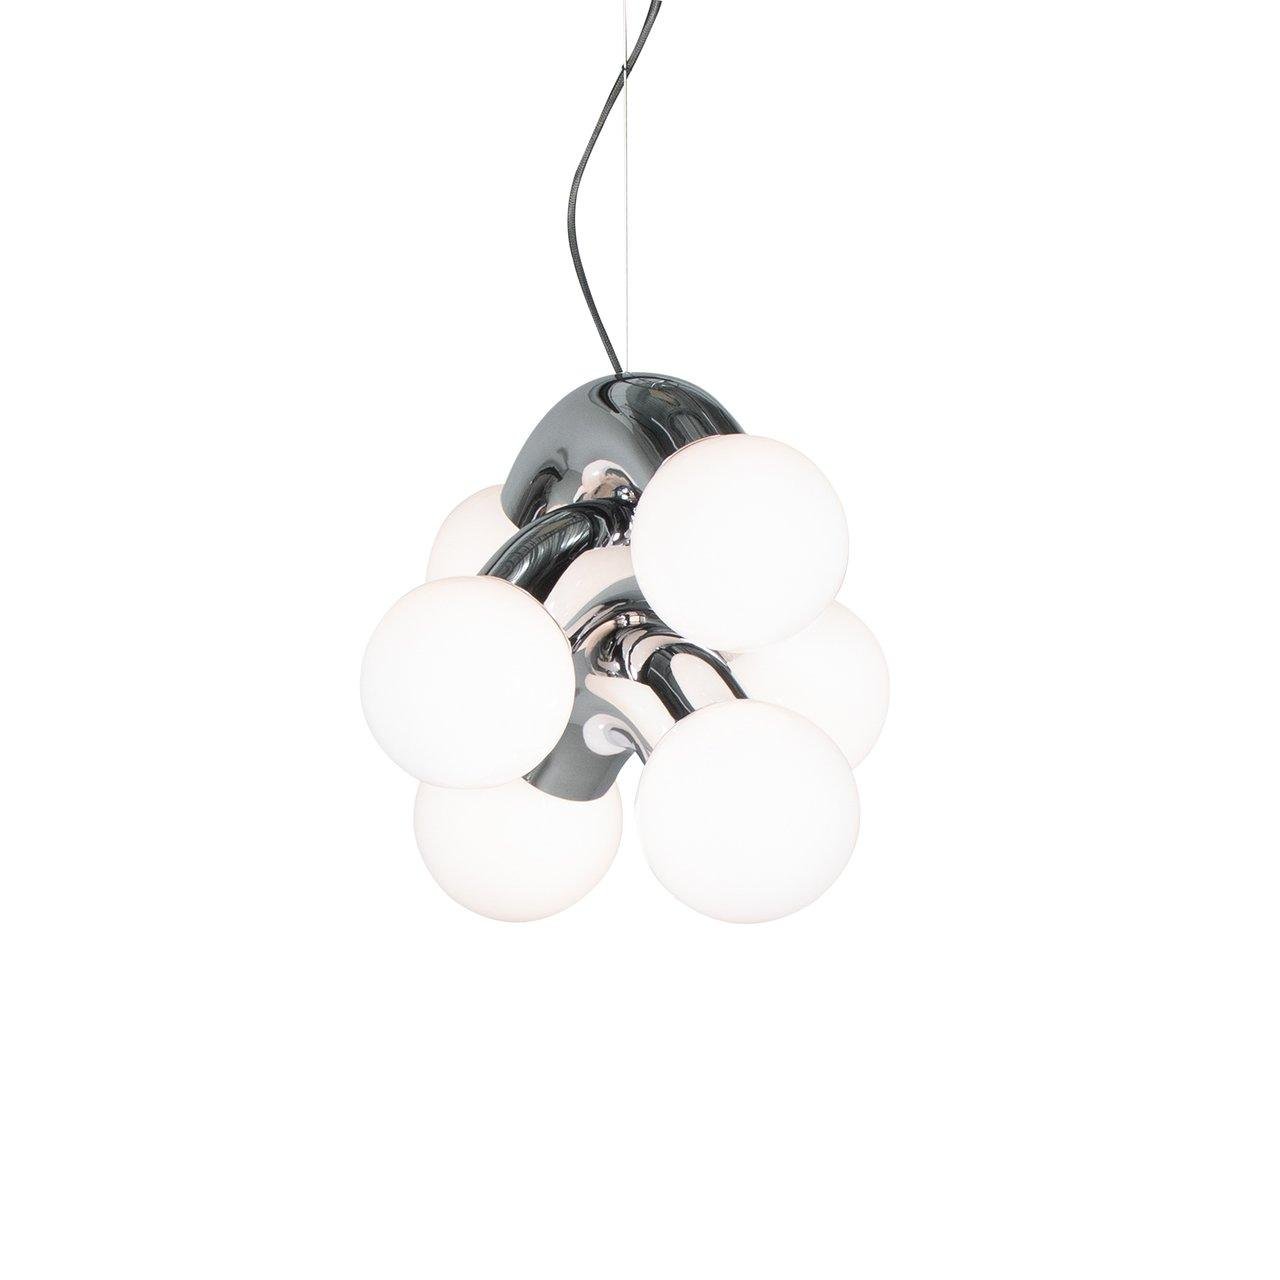 Chrome Vine Pendant Lamp with 6 Heads, Diameter 11.8 inches and Height 10.2 inches (30cm x 26cm)